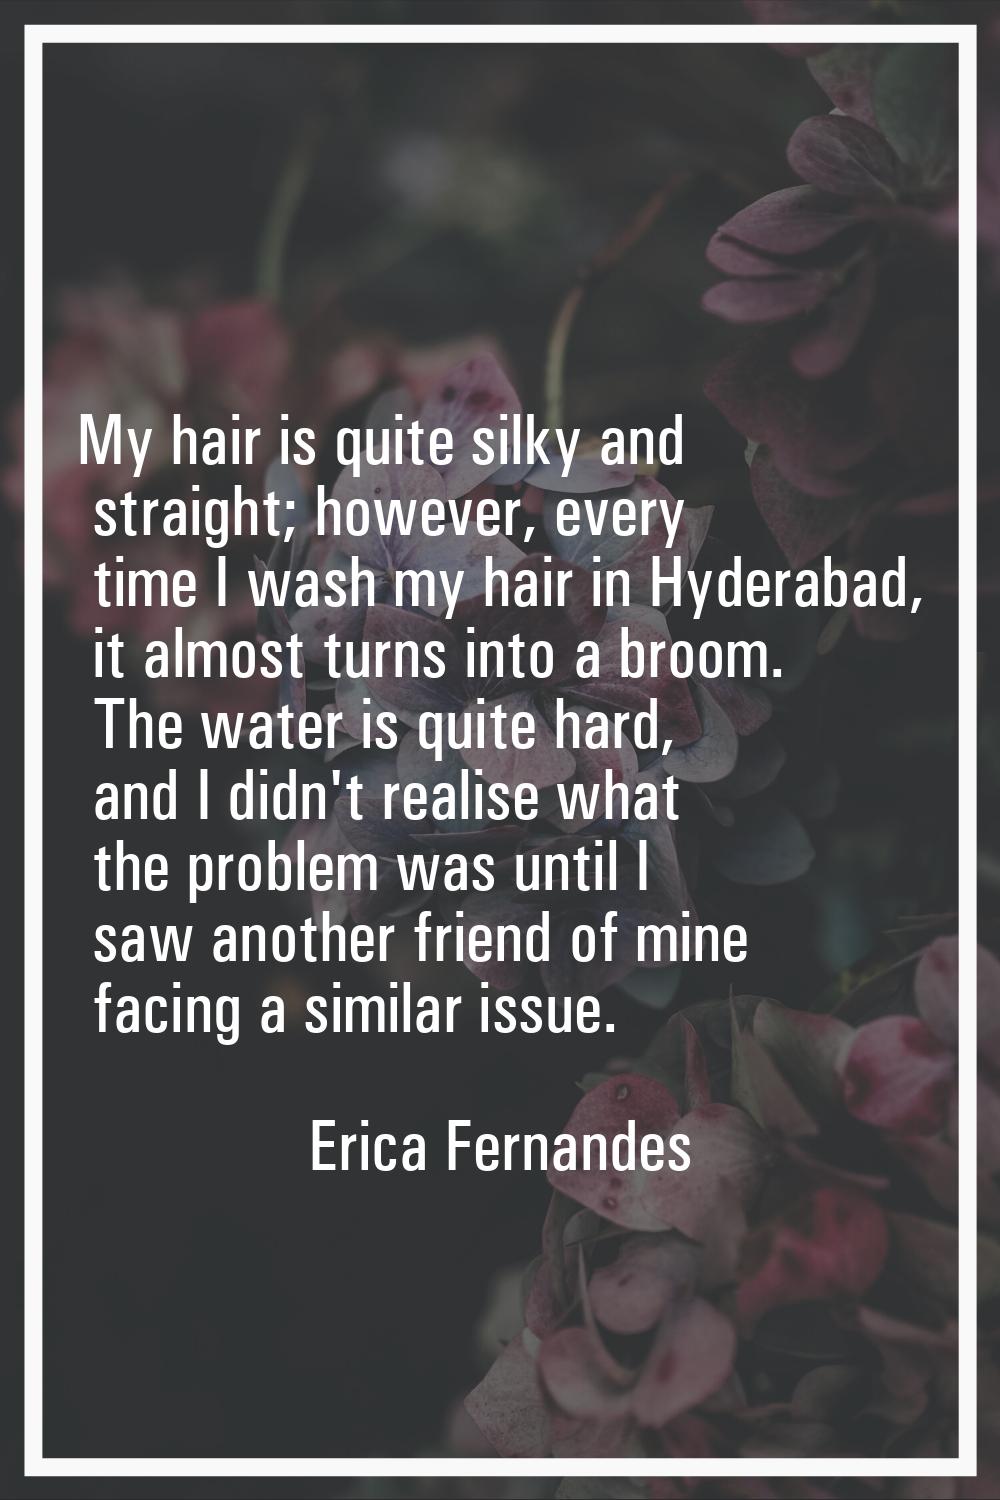 My hair is quite silky and straight; however, every time I wash my hair in Hyderabad, it almost tur